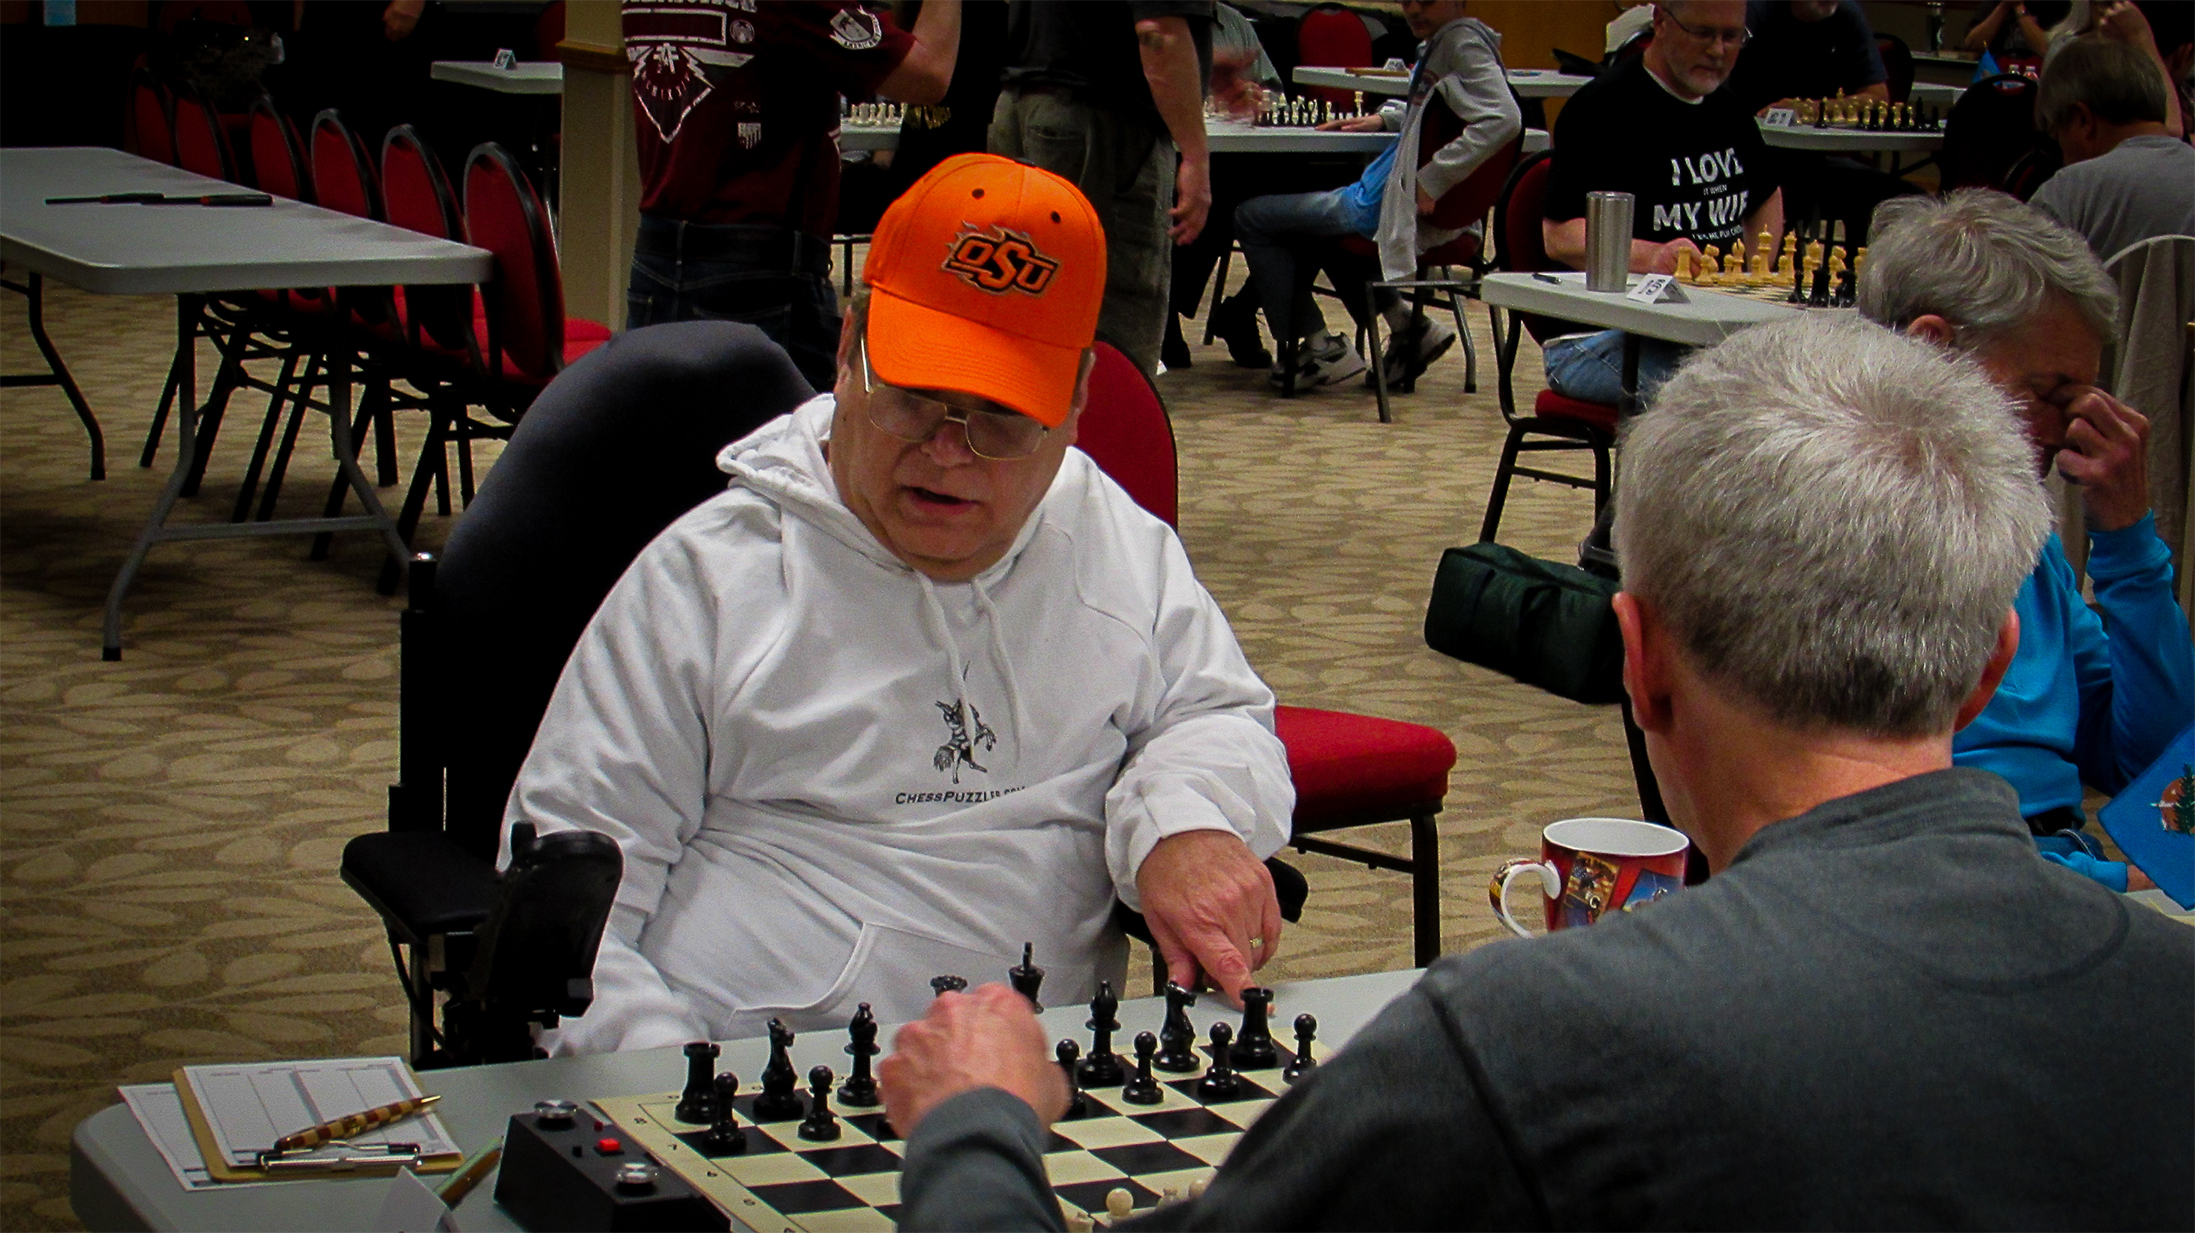 Wayne Hatcher (wearing the orange hat) split his match on Board 2.  He is ranked in the 95th Percentile for all USA players and in the 90th Percentile for all USA Seniors.  He is ranked 54th in Blitz for all USA Seniors.  He is ranked Number 19 for all Oklahoma players.  In 2009 he won the 26-player Arizona Senior Open with a 4.5/5.0 score.  Photo by Mike Tubbs.